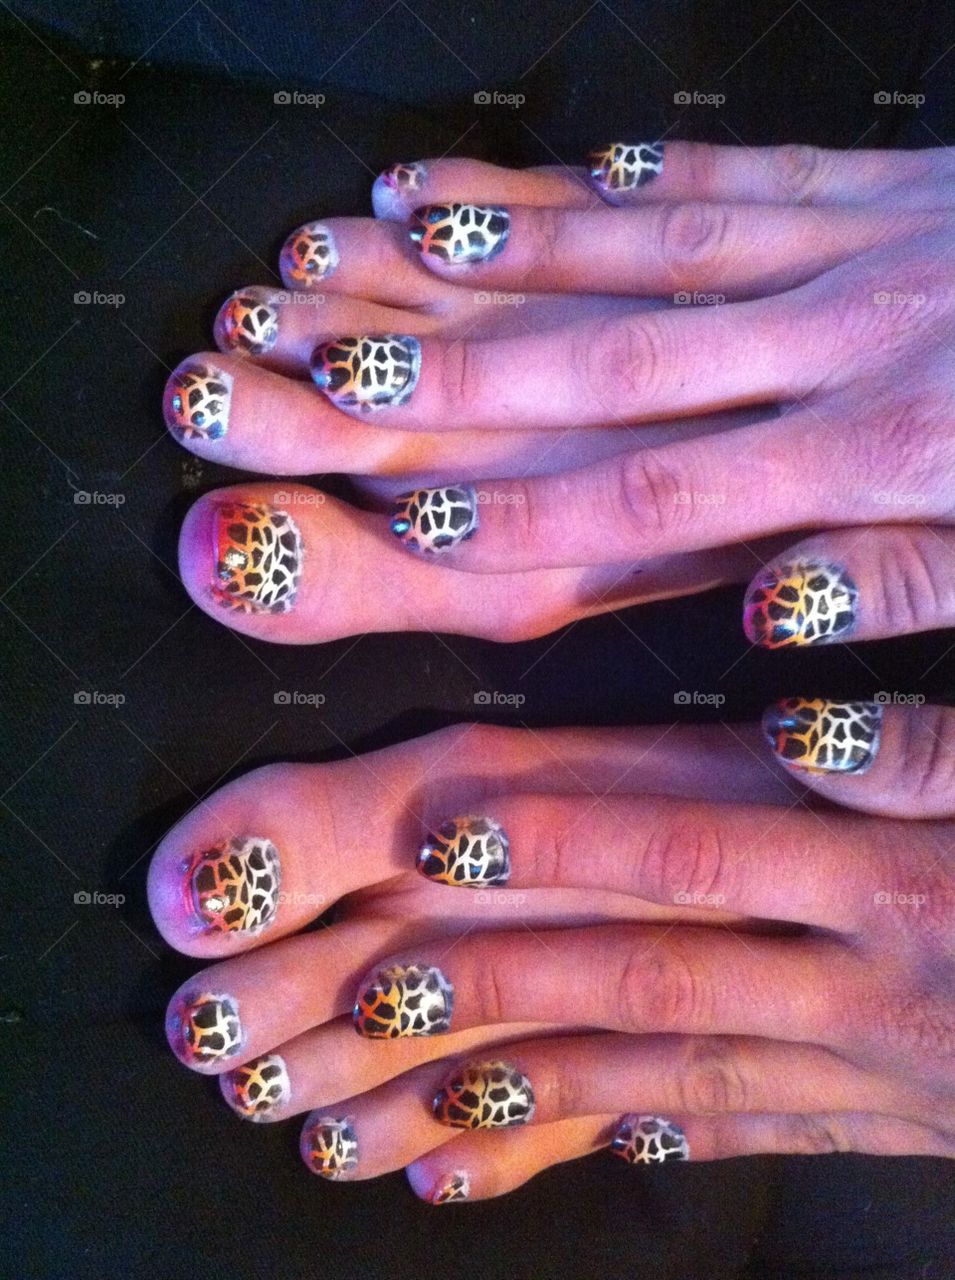 Colour and pattern to make the nails pop!  